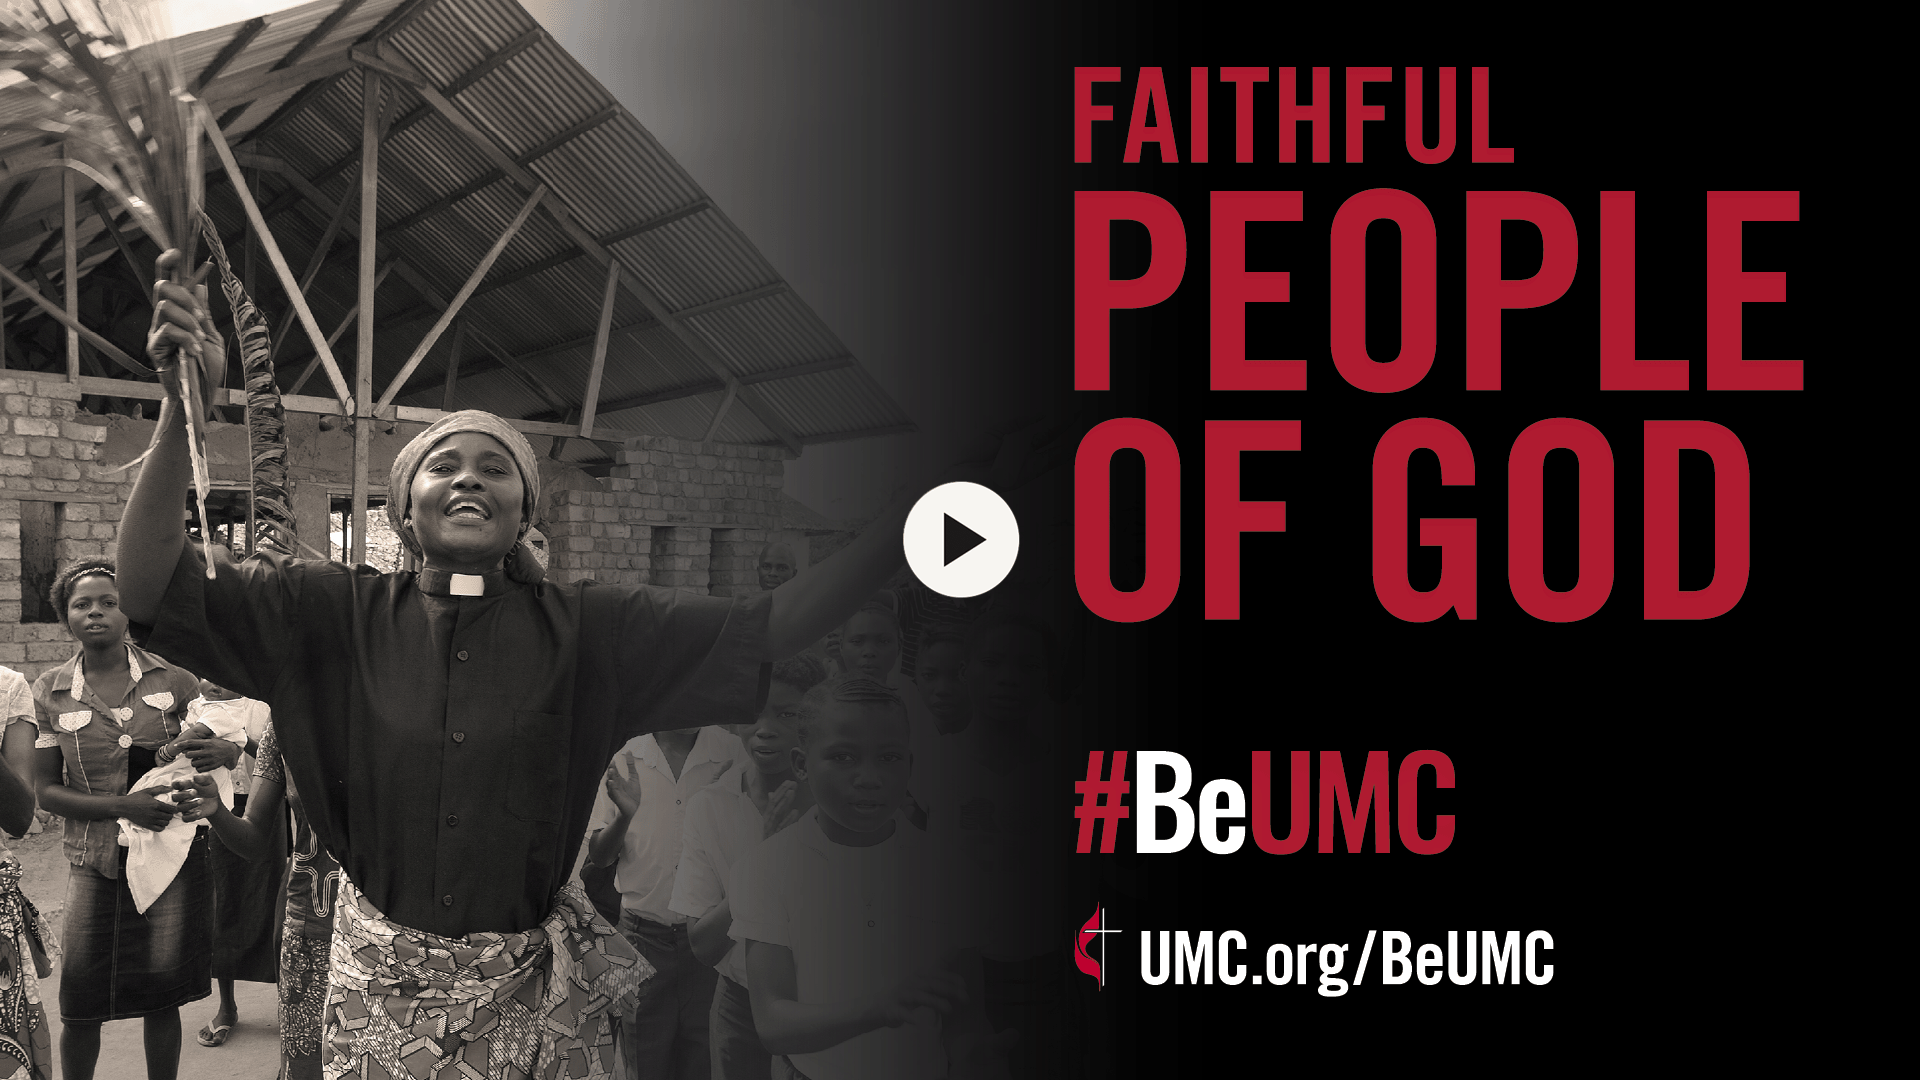 We are devoted to an ongoing, meaningful journey of discipleship. The #BeUMC campaign reminds us of who we are at our best — the spirit-filled, resilient, connected, missional, faithful, diverse, deeply rooted, committed, disciple-making, Jesus-seeking, generous, justice-seeking, world-changing people of God called The United Methodist Church.